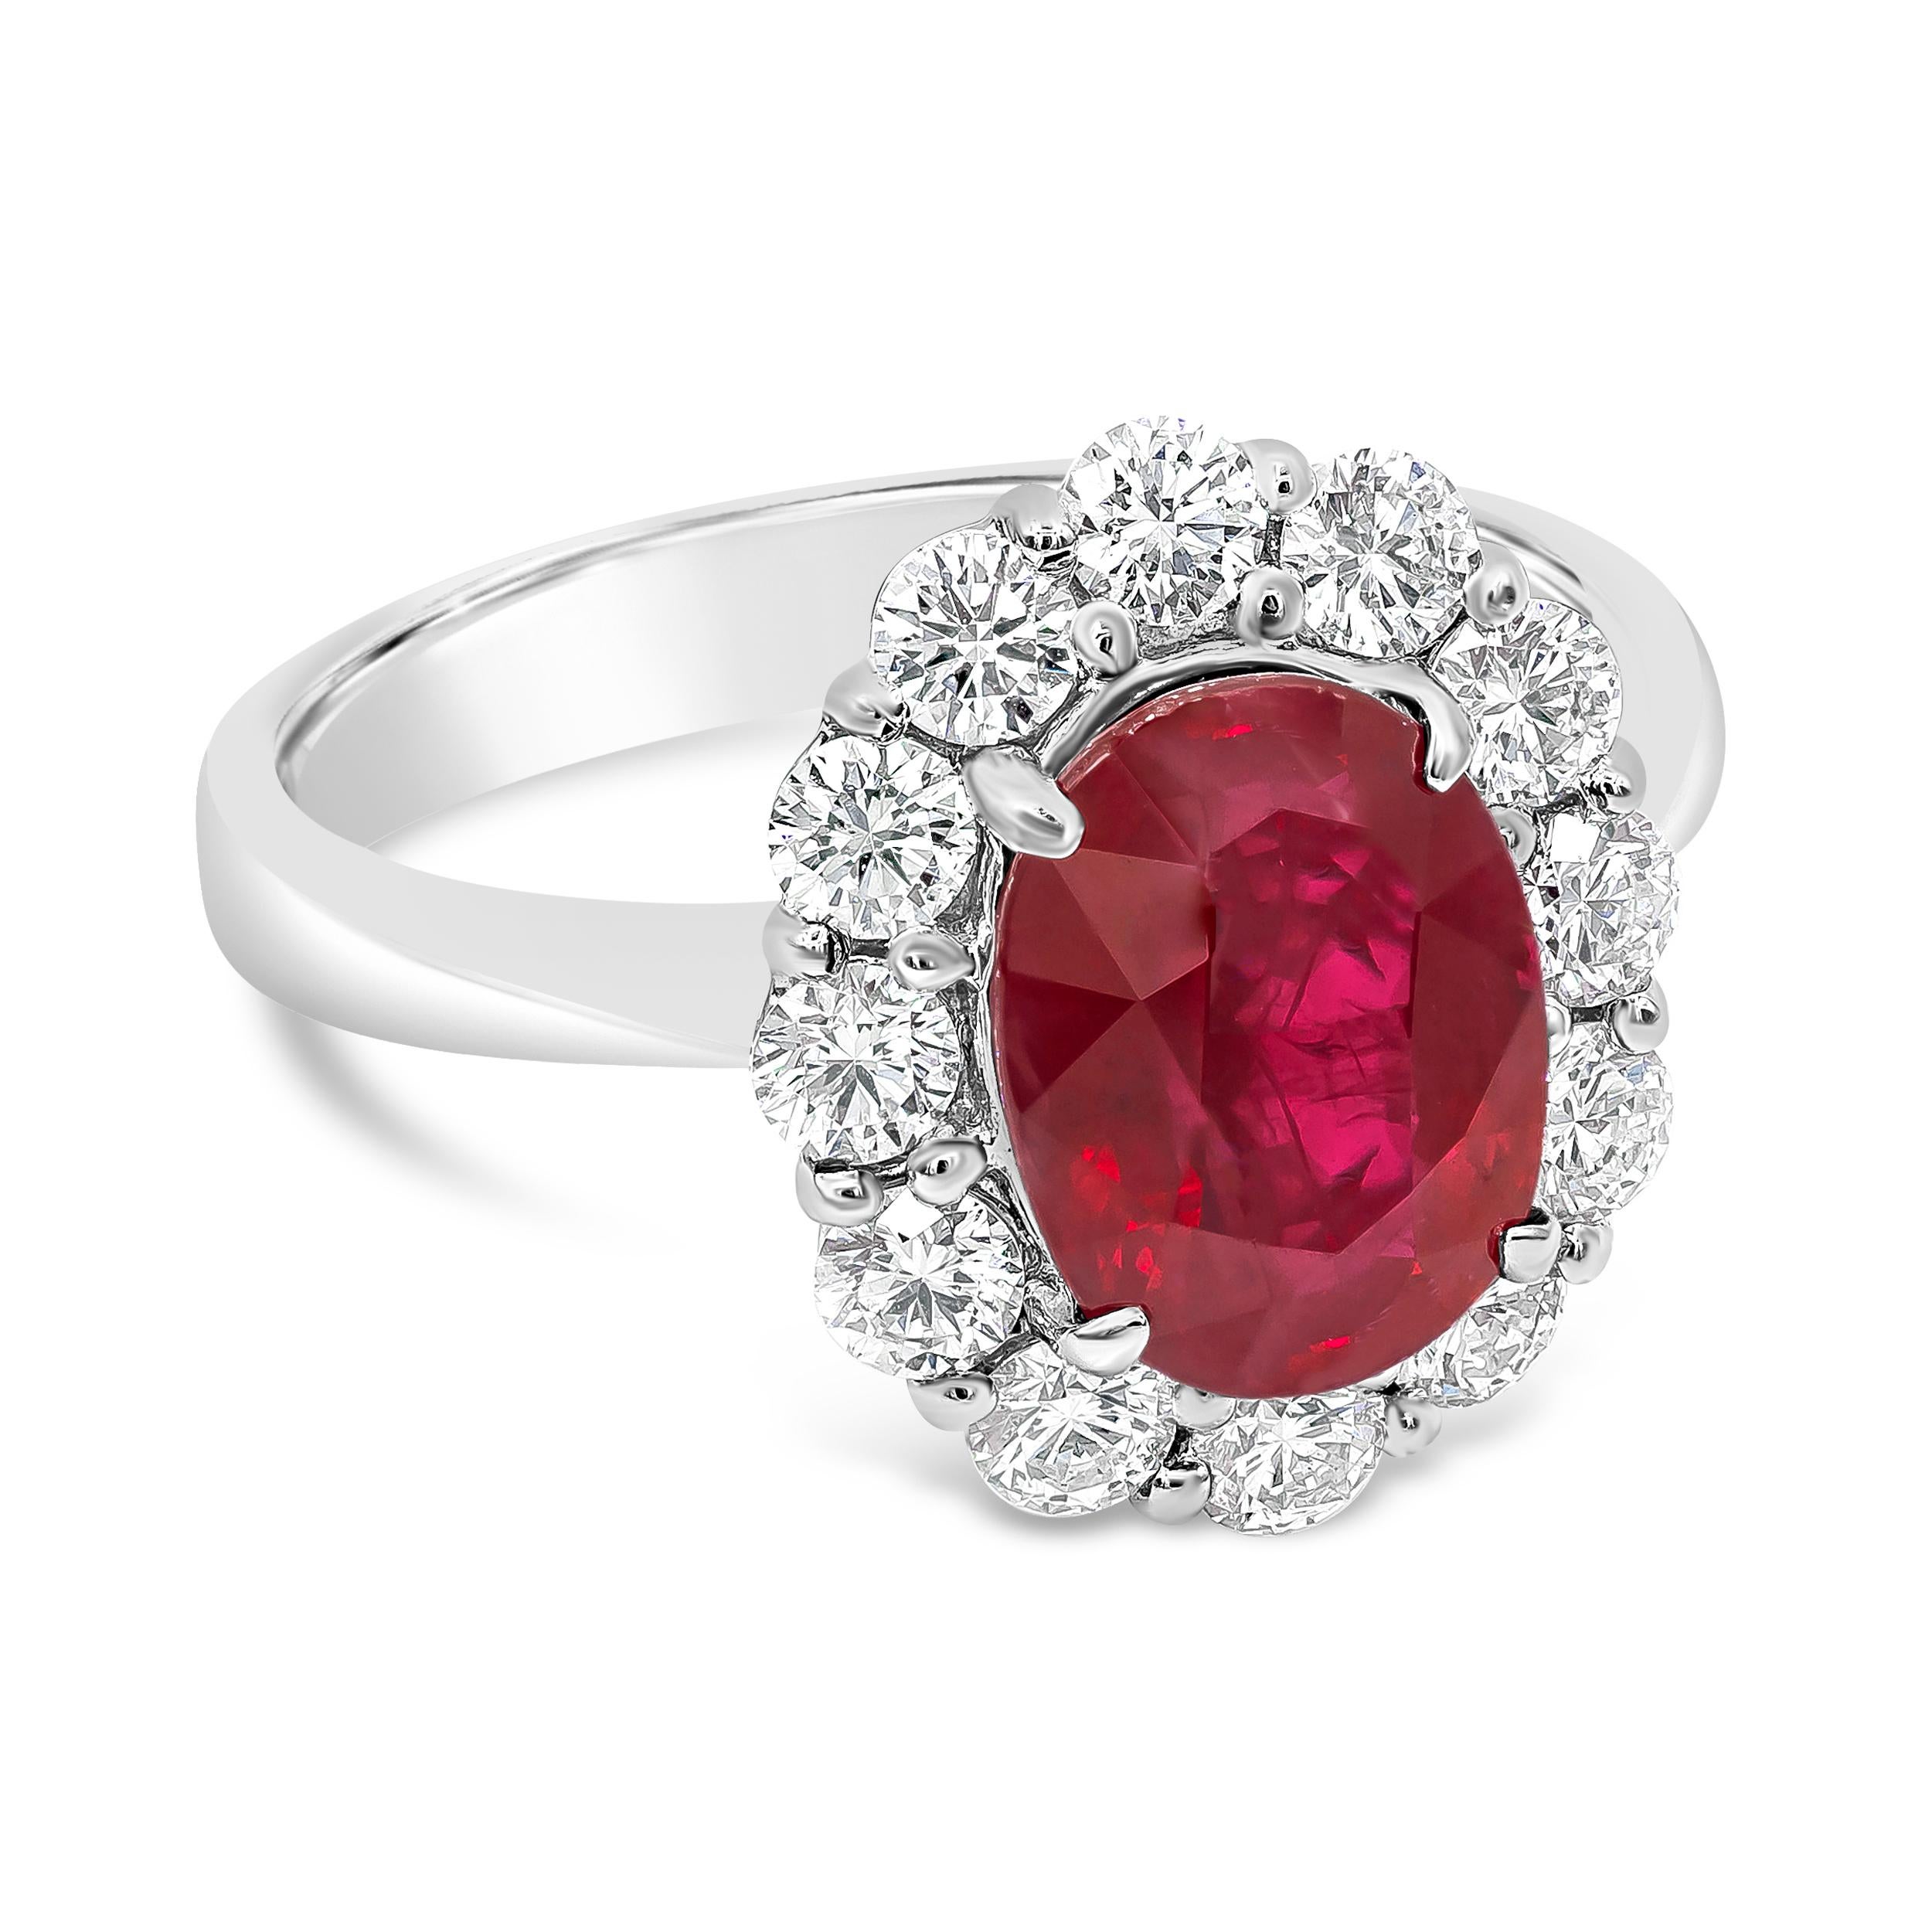 Showcasing a vibrant oval cut ruby weighing 3.00 carats, surrounded by a row of round brilliant diamonds, set in a polished 18 karat white gold mounting. Accent diamonds weigh 0.89 carats total.

Roman Malakov is a custom house, specializing in